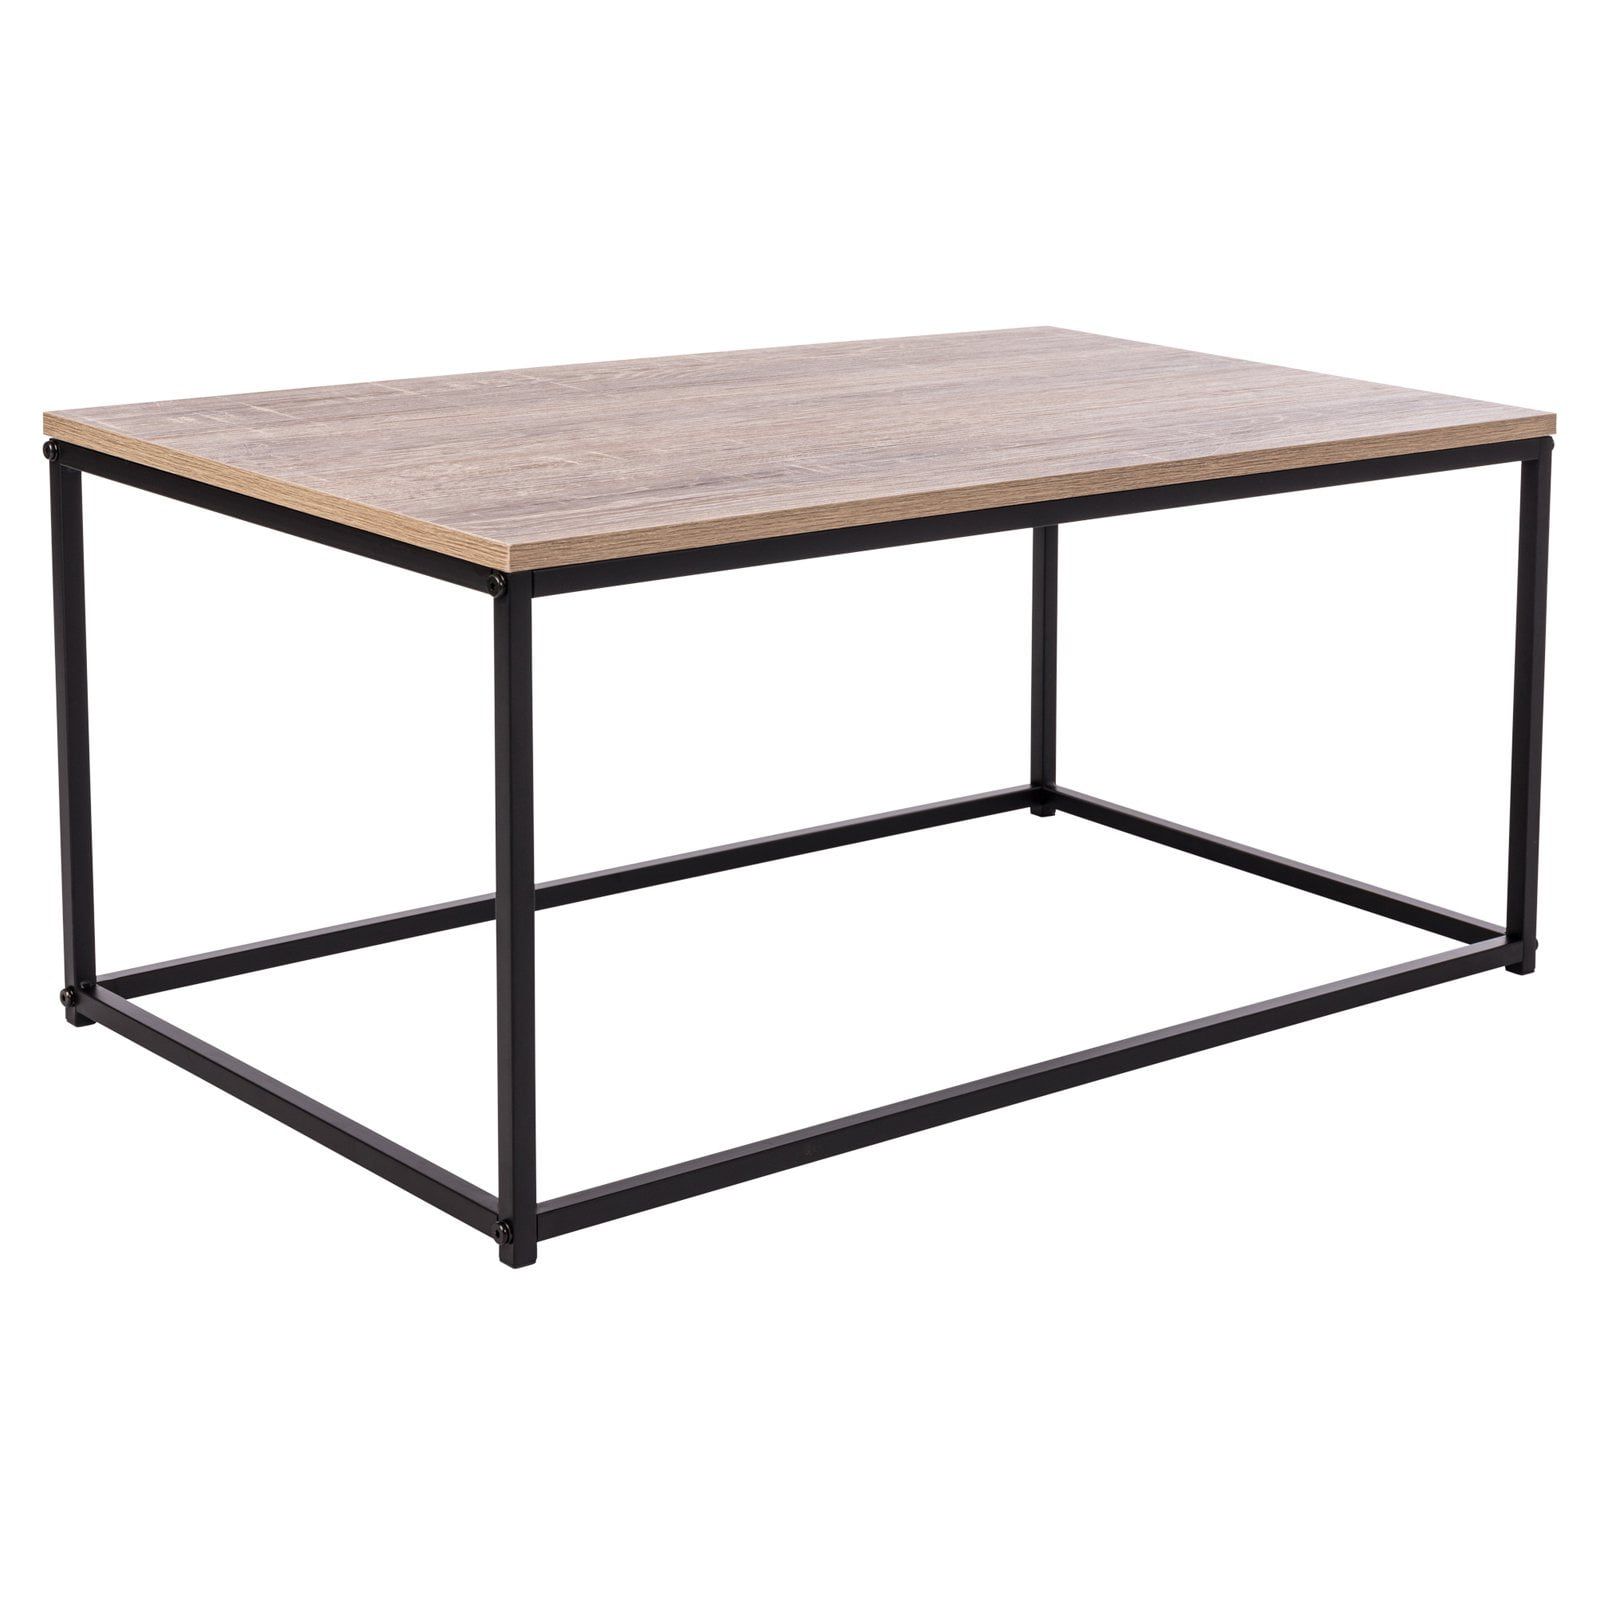 Avalon Home Tribeca Coffee Table – Walmart For Coffee Tables For 4 6 People (View 3 of 20)